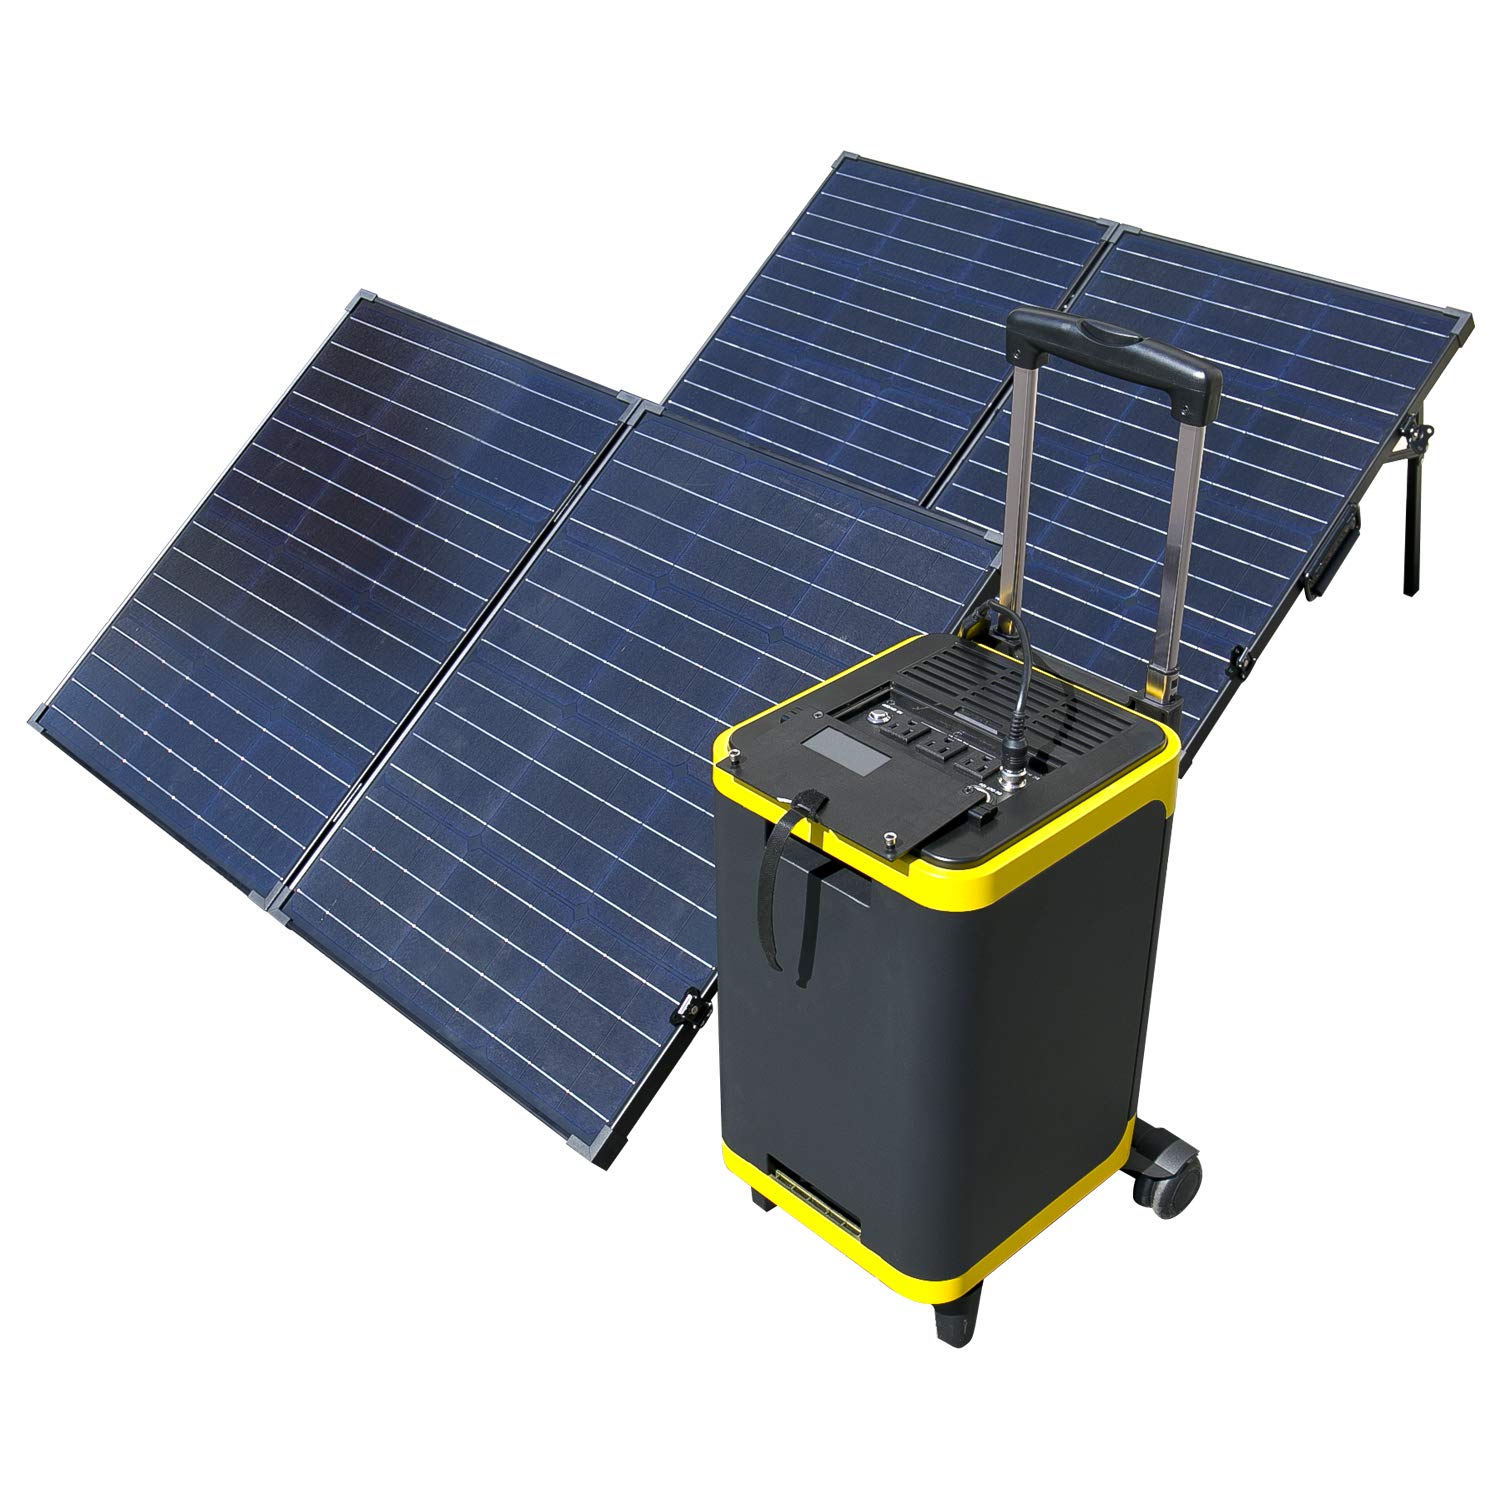 ExpertPower Alpha2700 Portable Power Station Combo